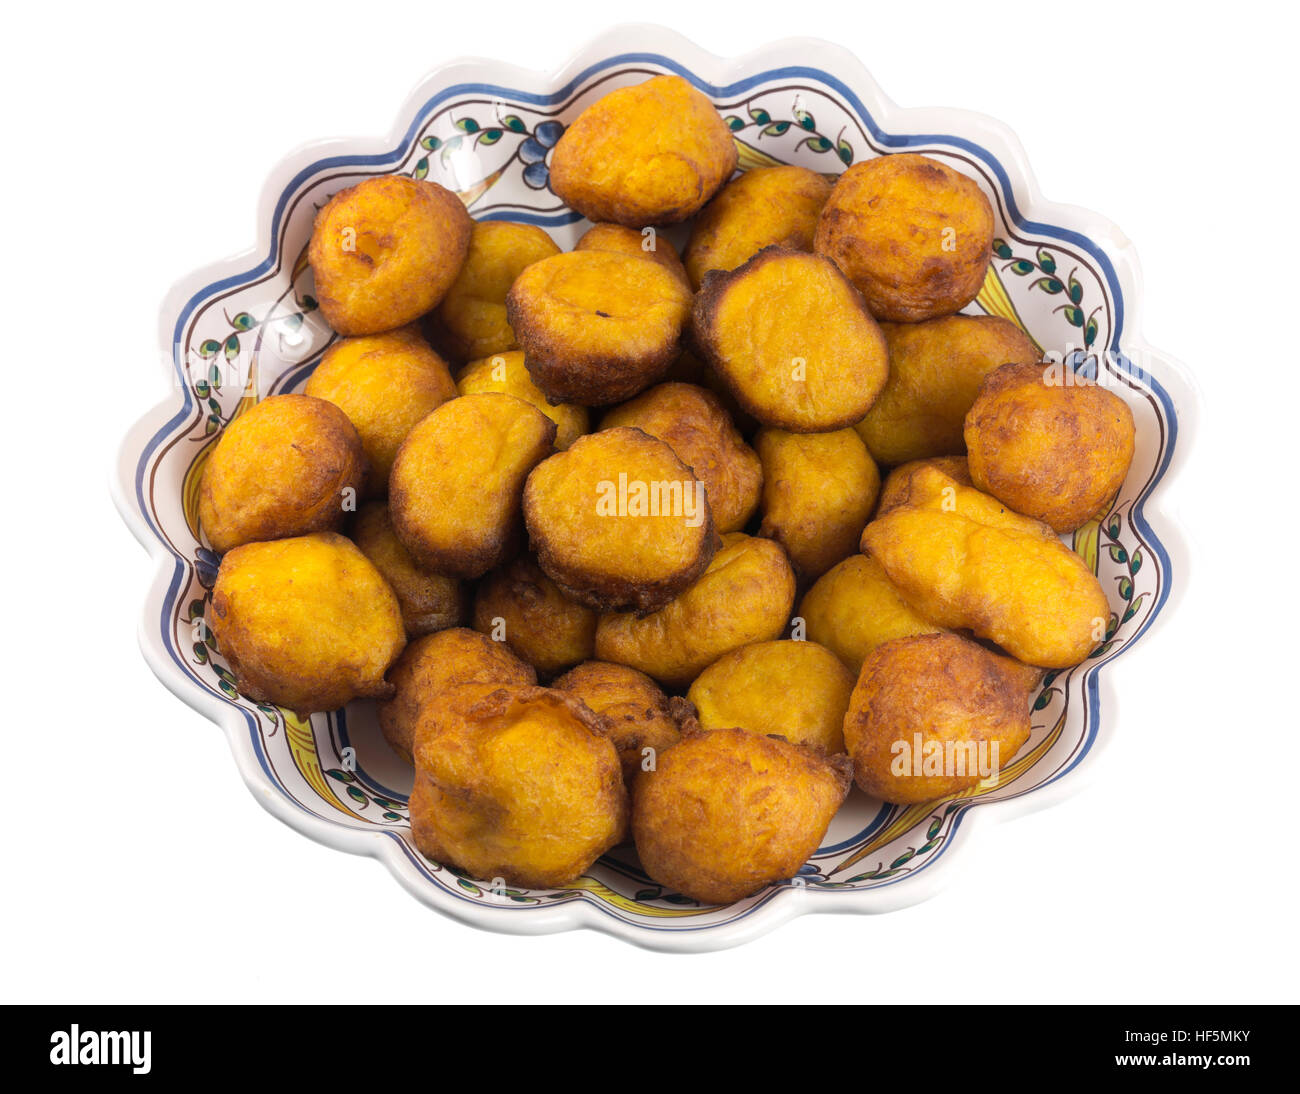 Filhoses de Abobora, or pumpkin fritters, are small yellow pumpkin fried cakes tradionally made during the Christmas season in Portugal Stock Photo